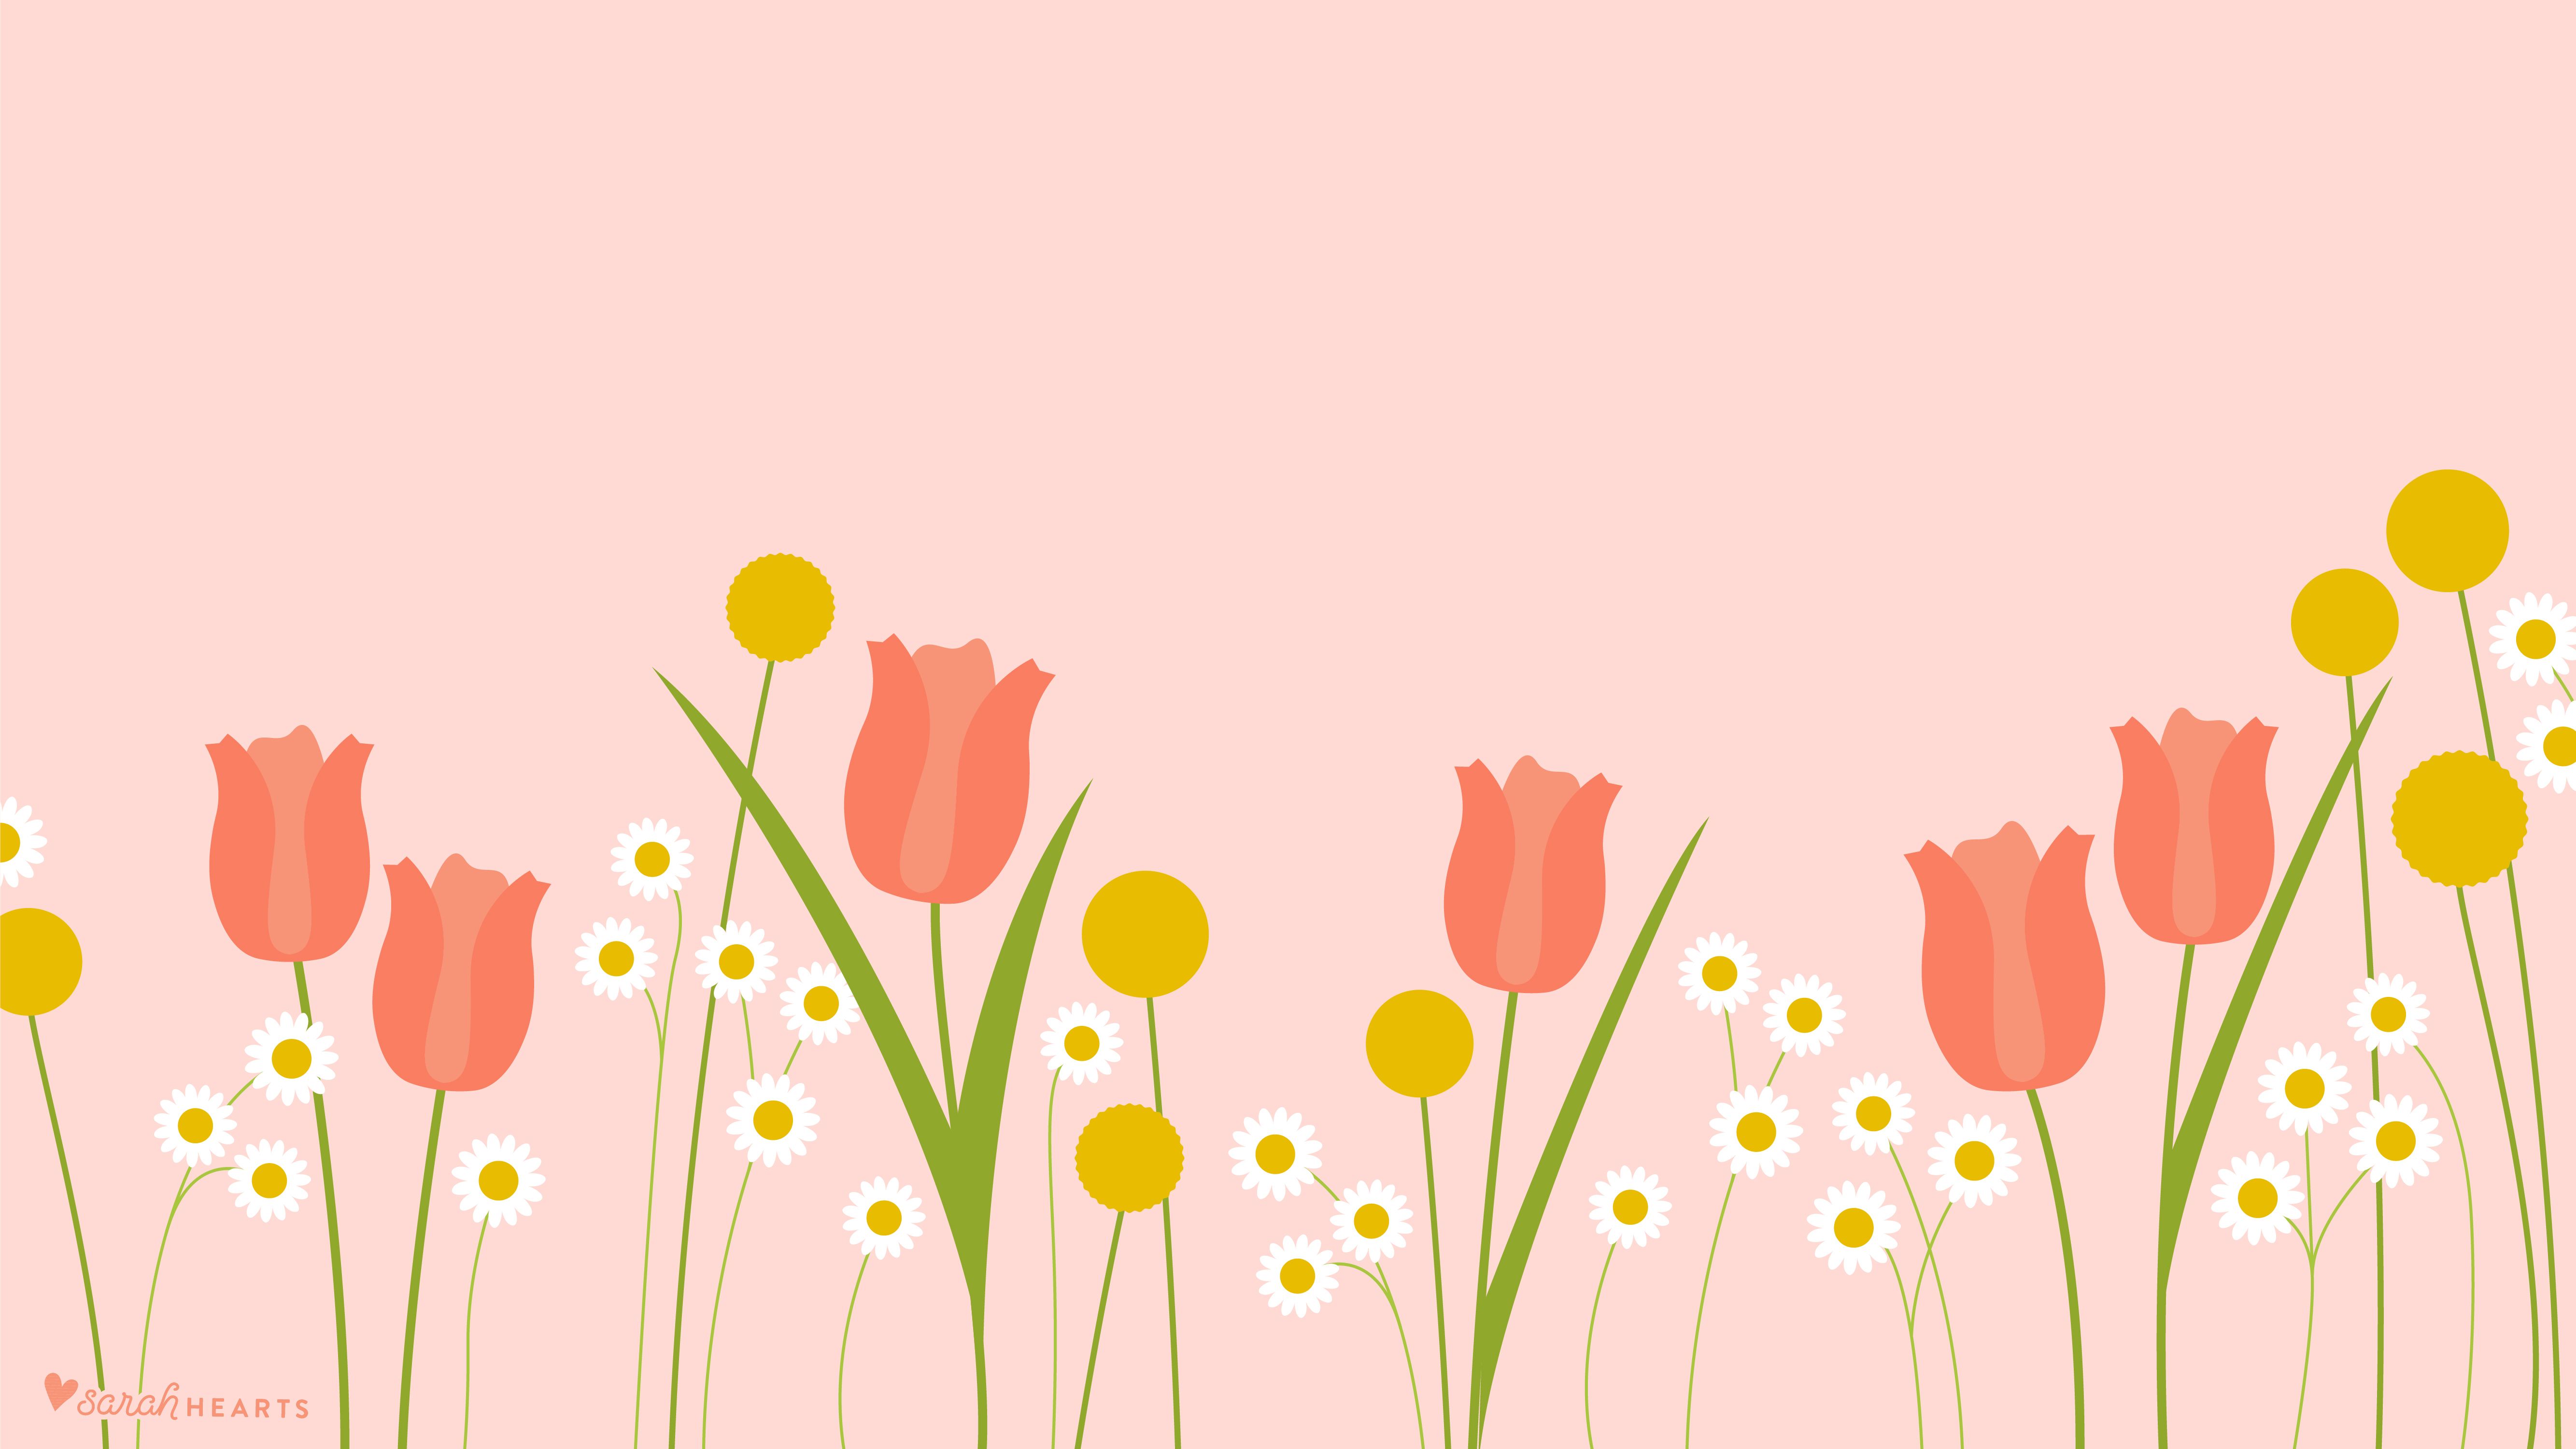 A field of pink tulips and daisies on a pink background - May